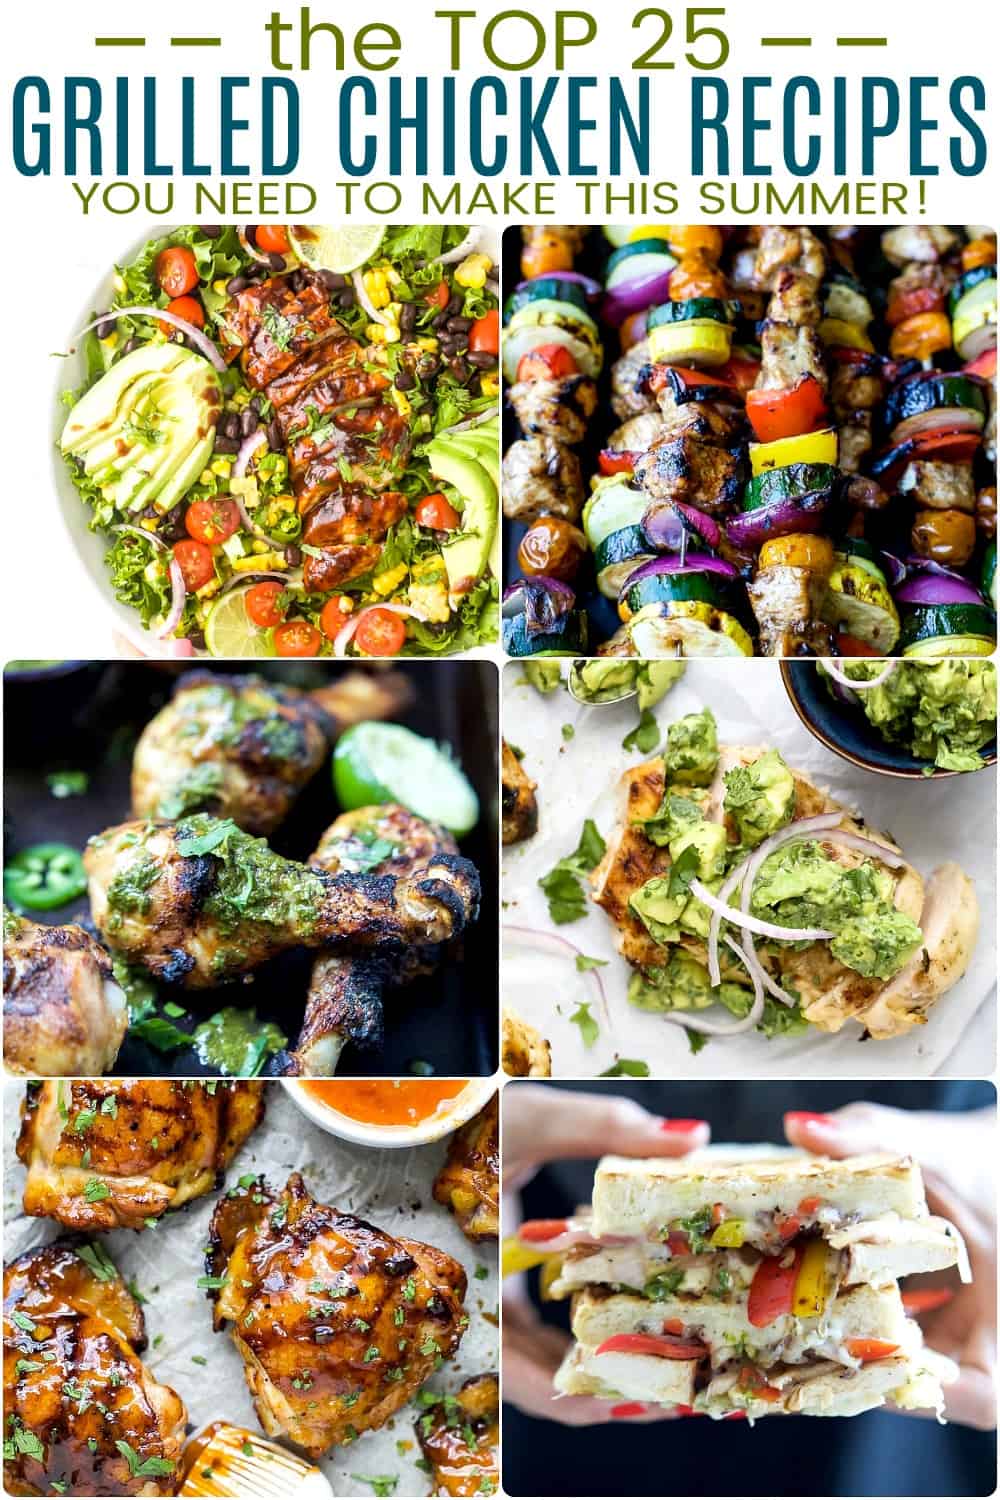 pinterst image for the Top 25 Grilled Chicken Recipes you need to make this summer